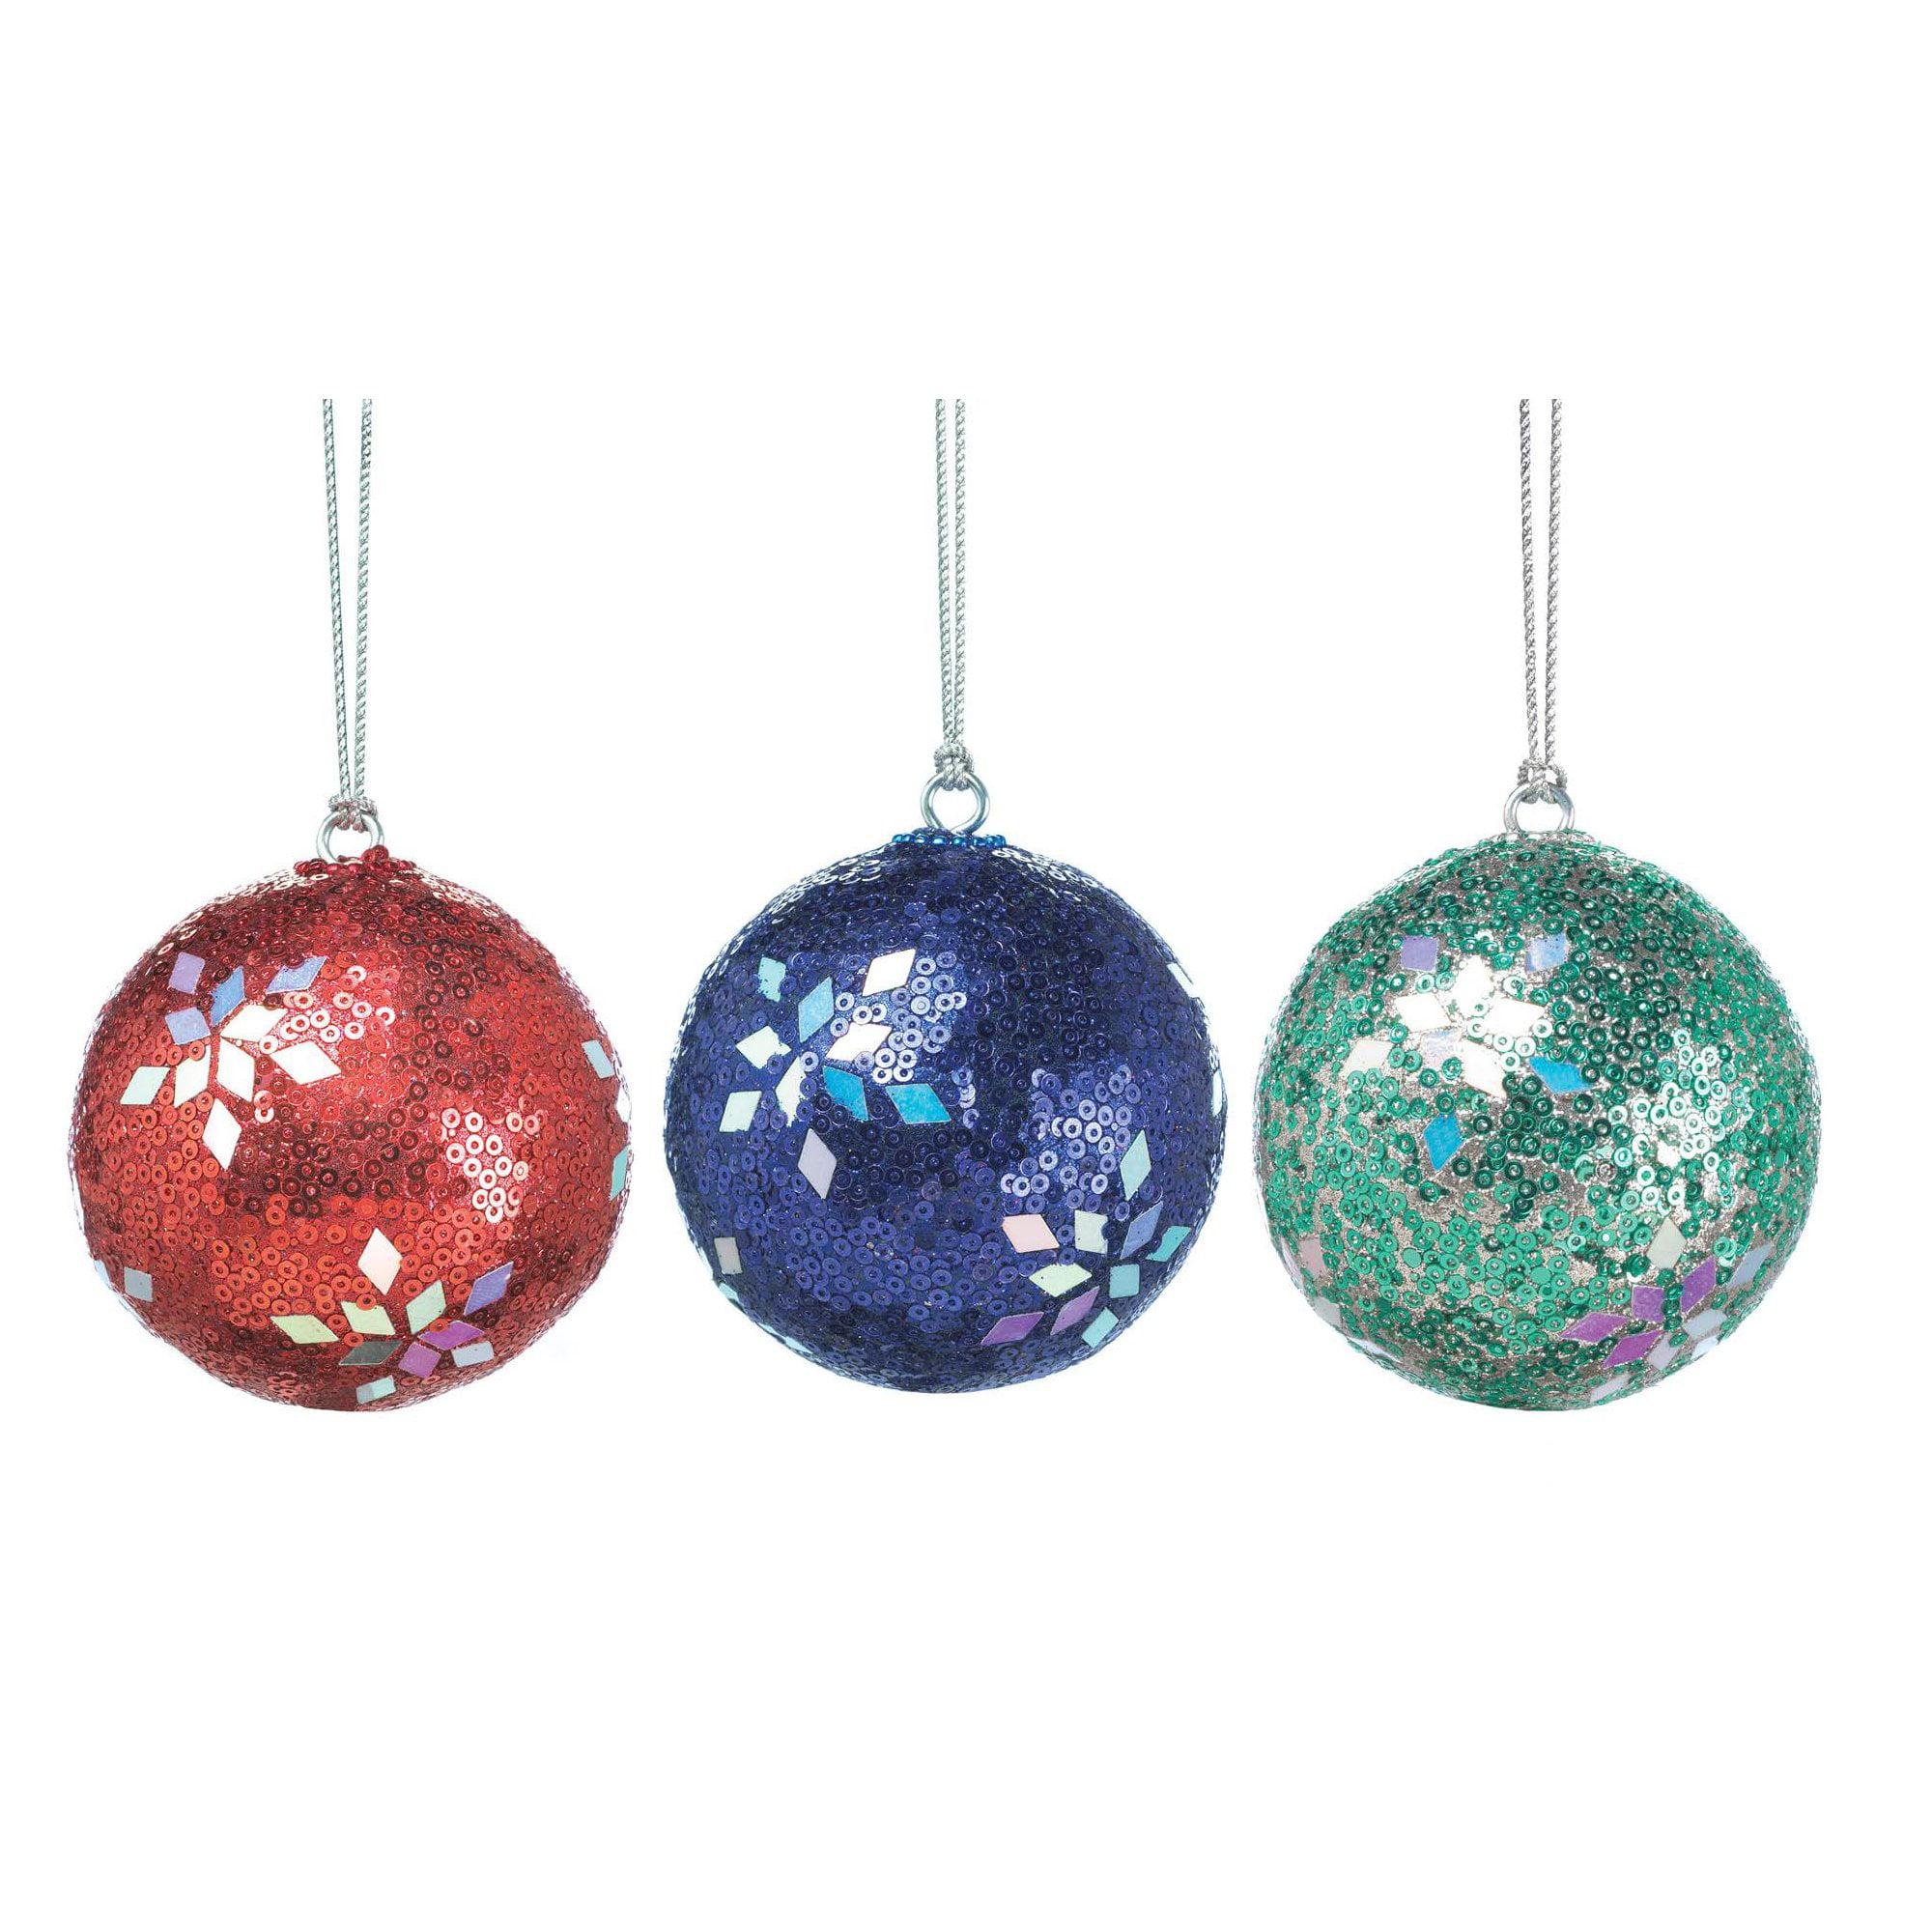 Unique Christmas Ornament for Small Space